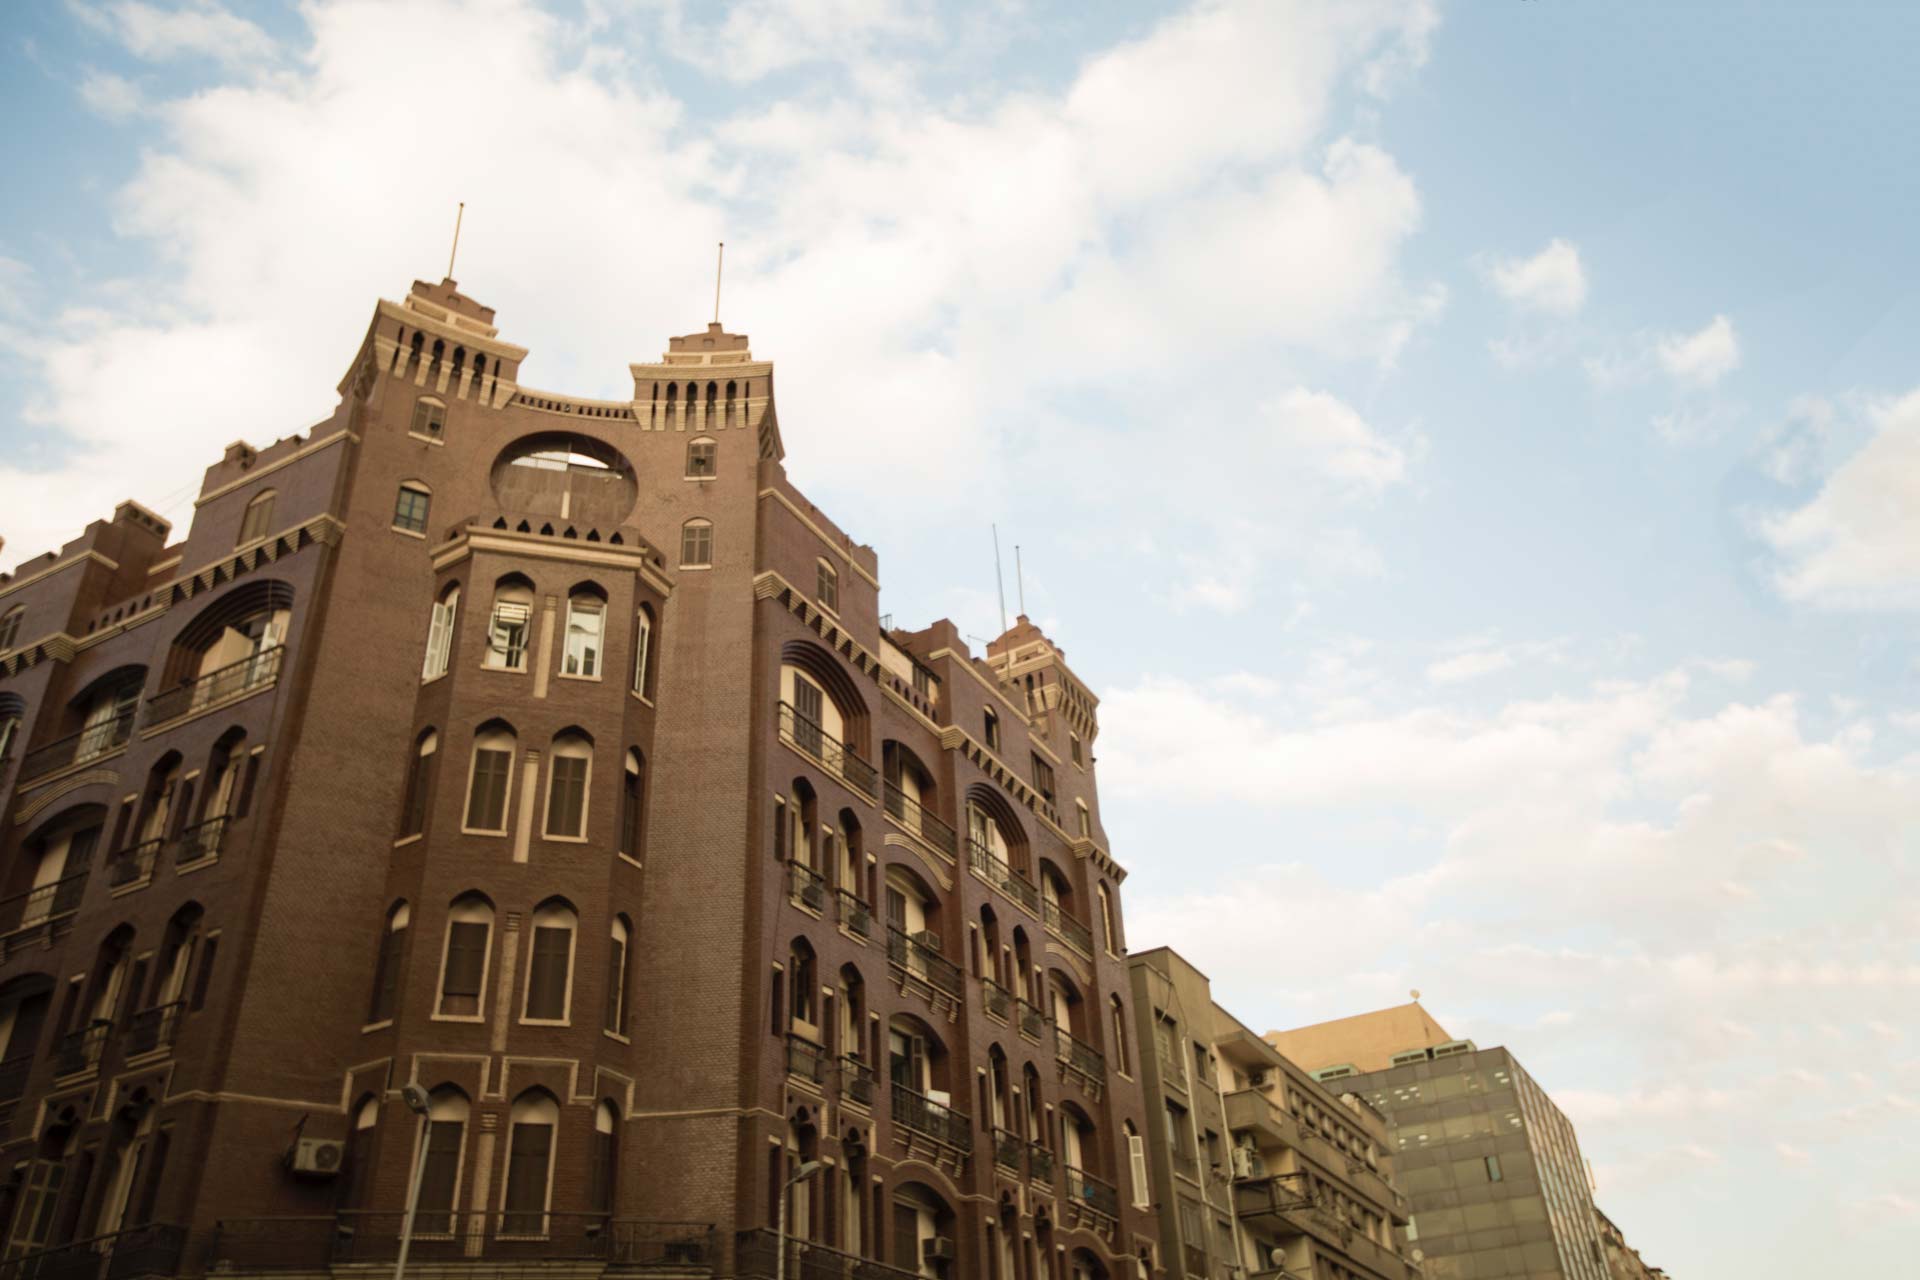 WE ARE LOCATED IN THE
HEART OF CAIRO